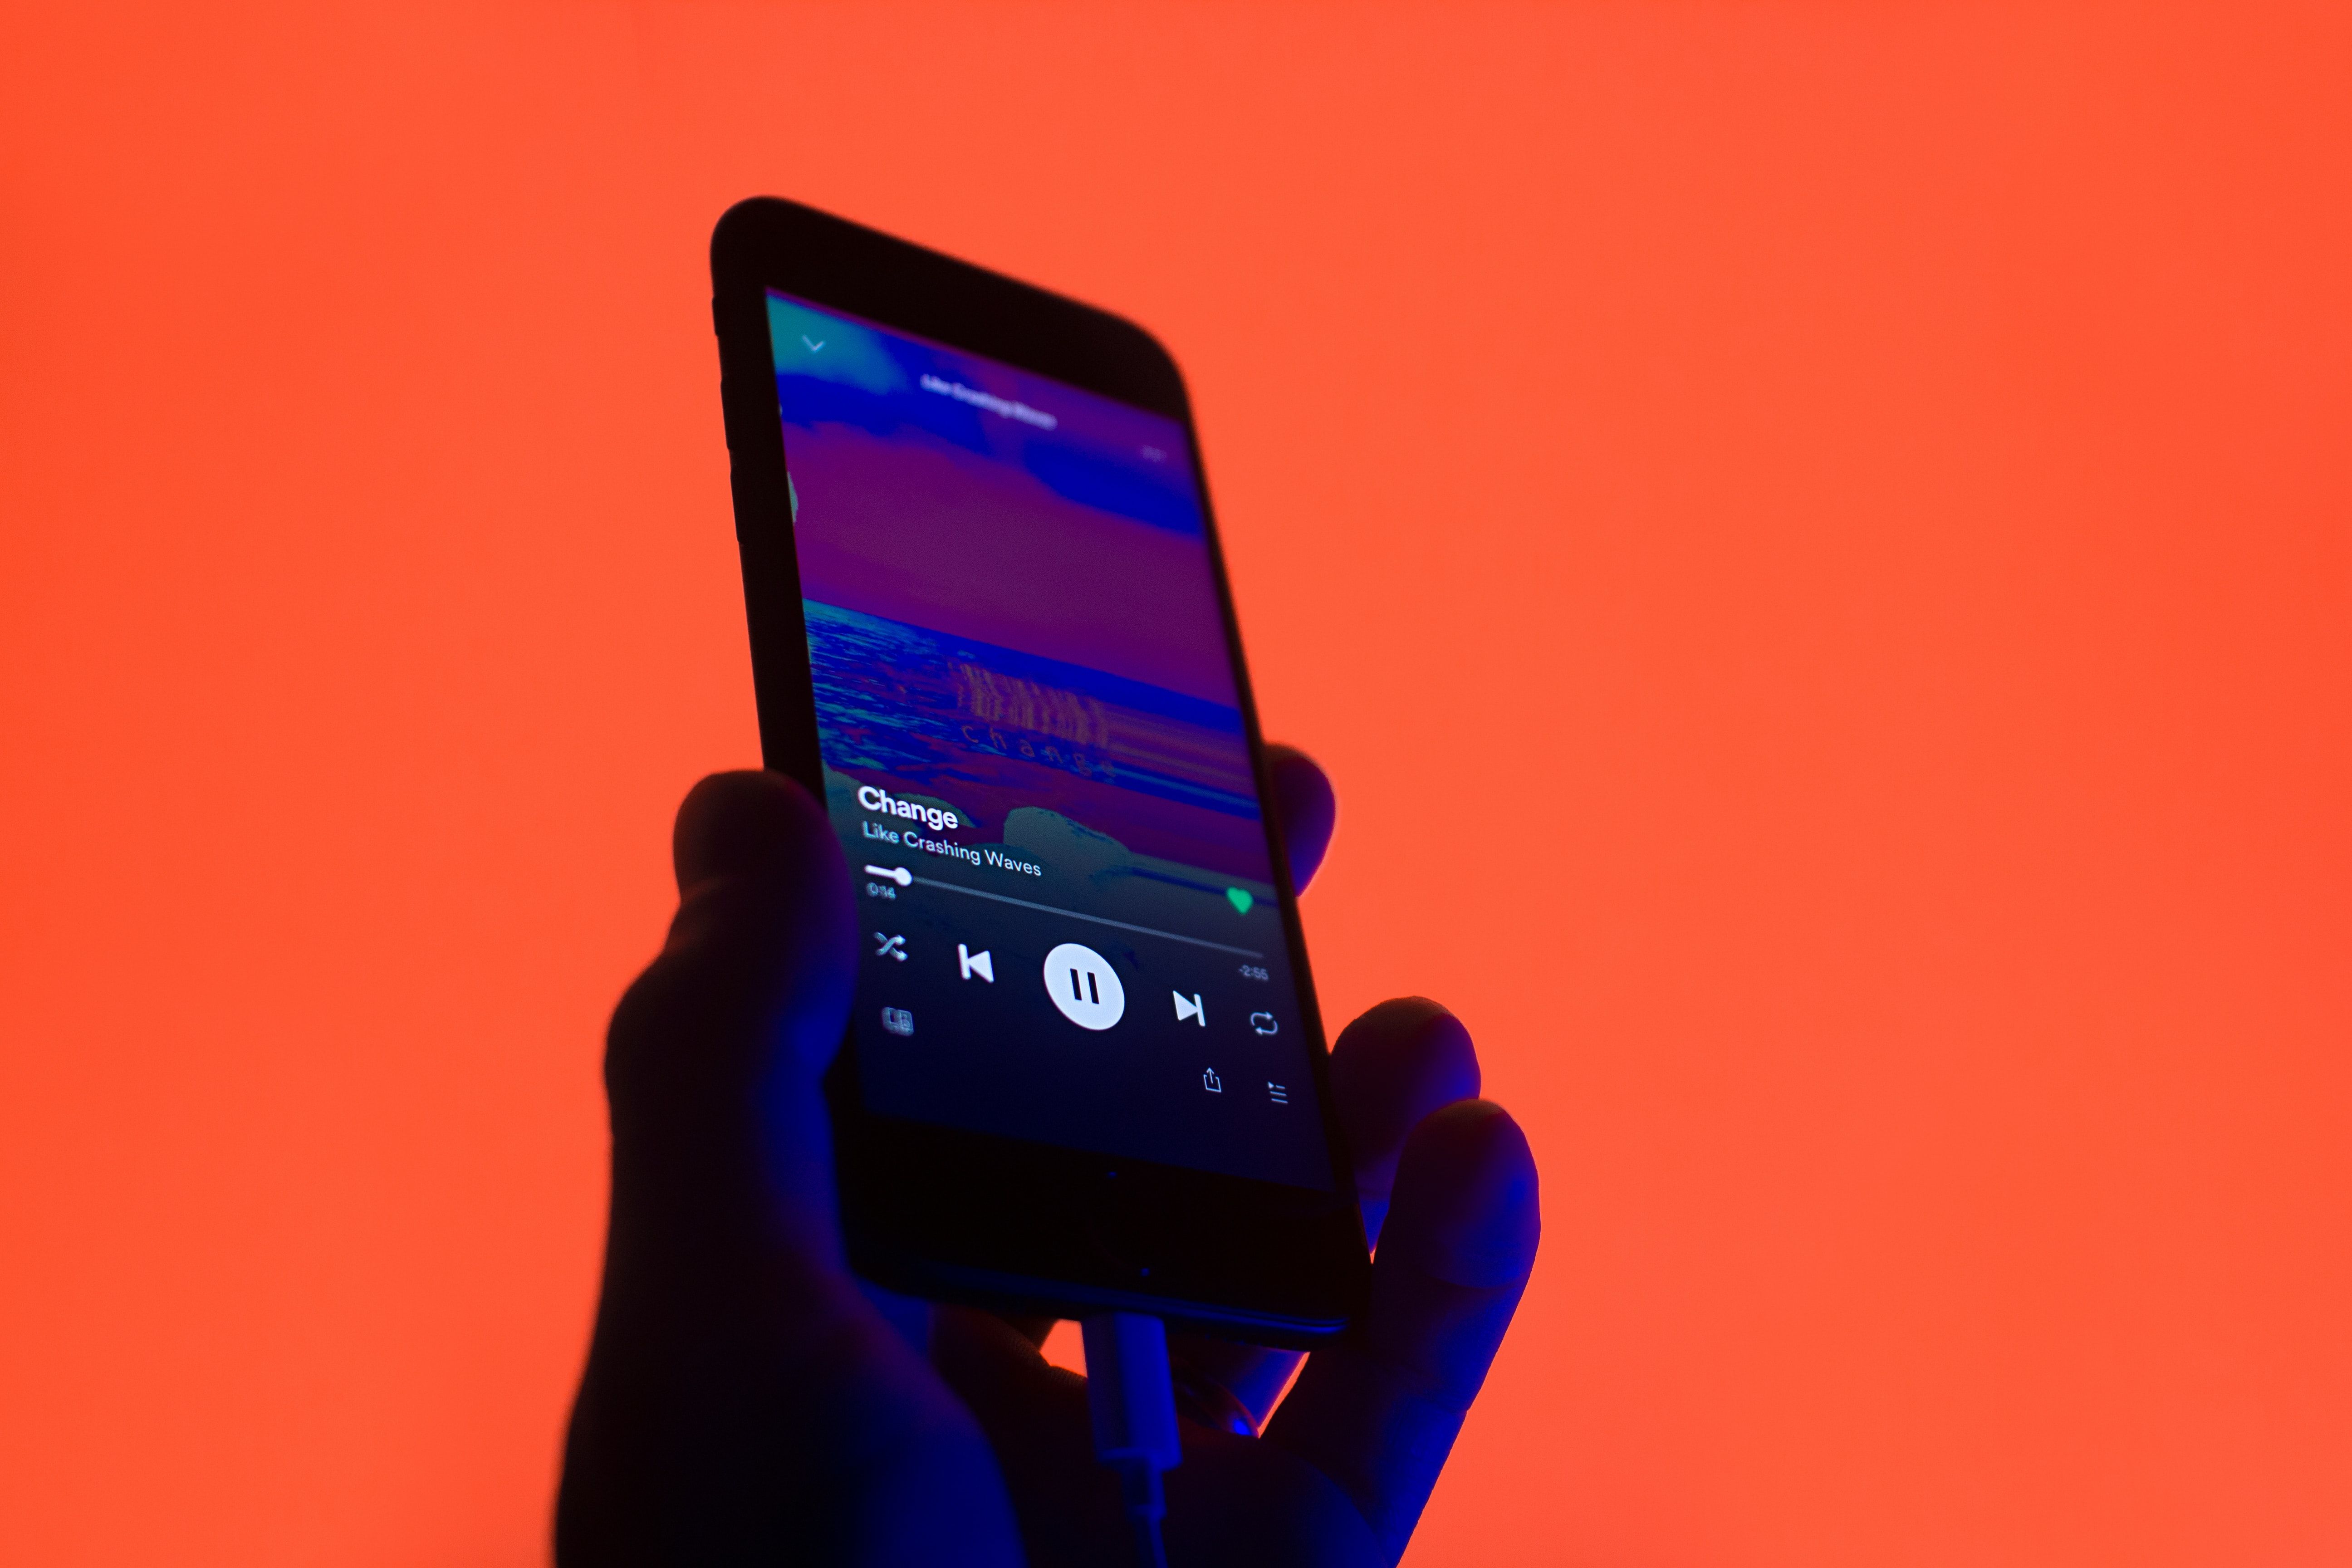 A person playing music on a smartphone over red.